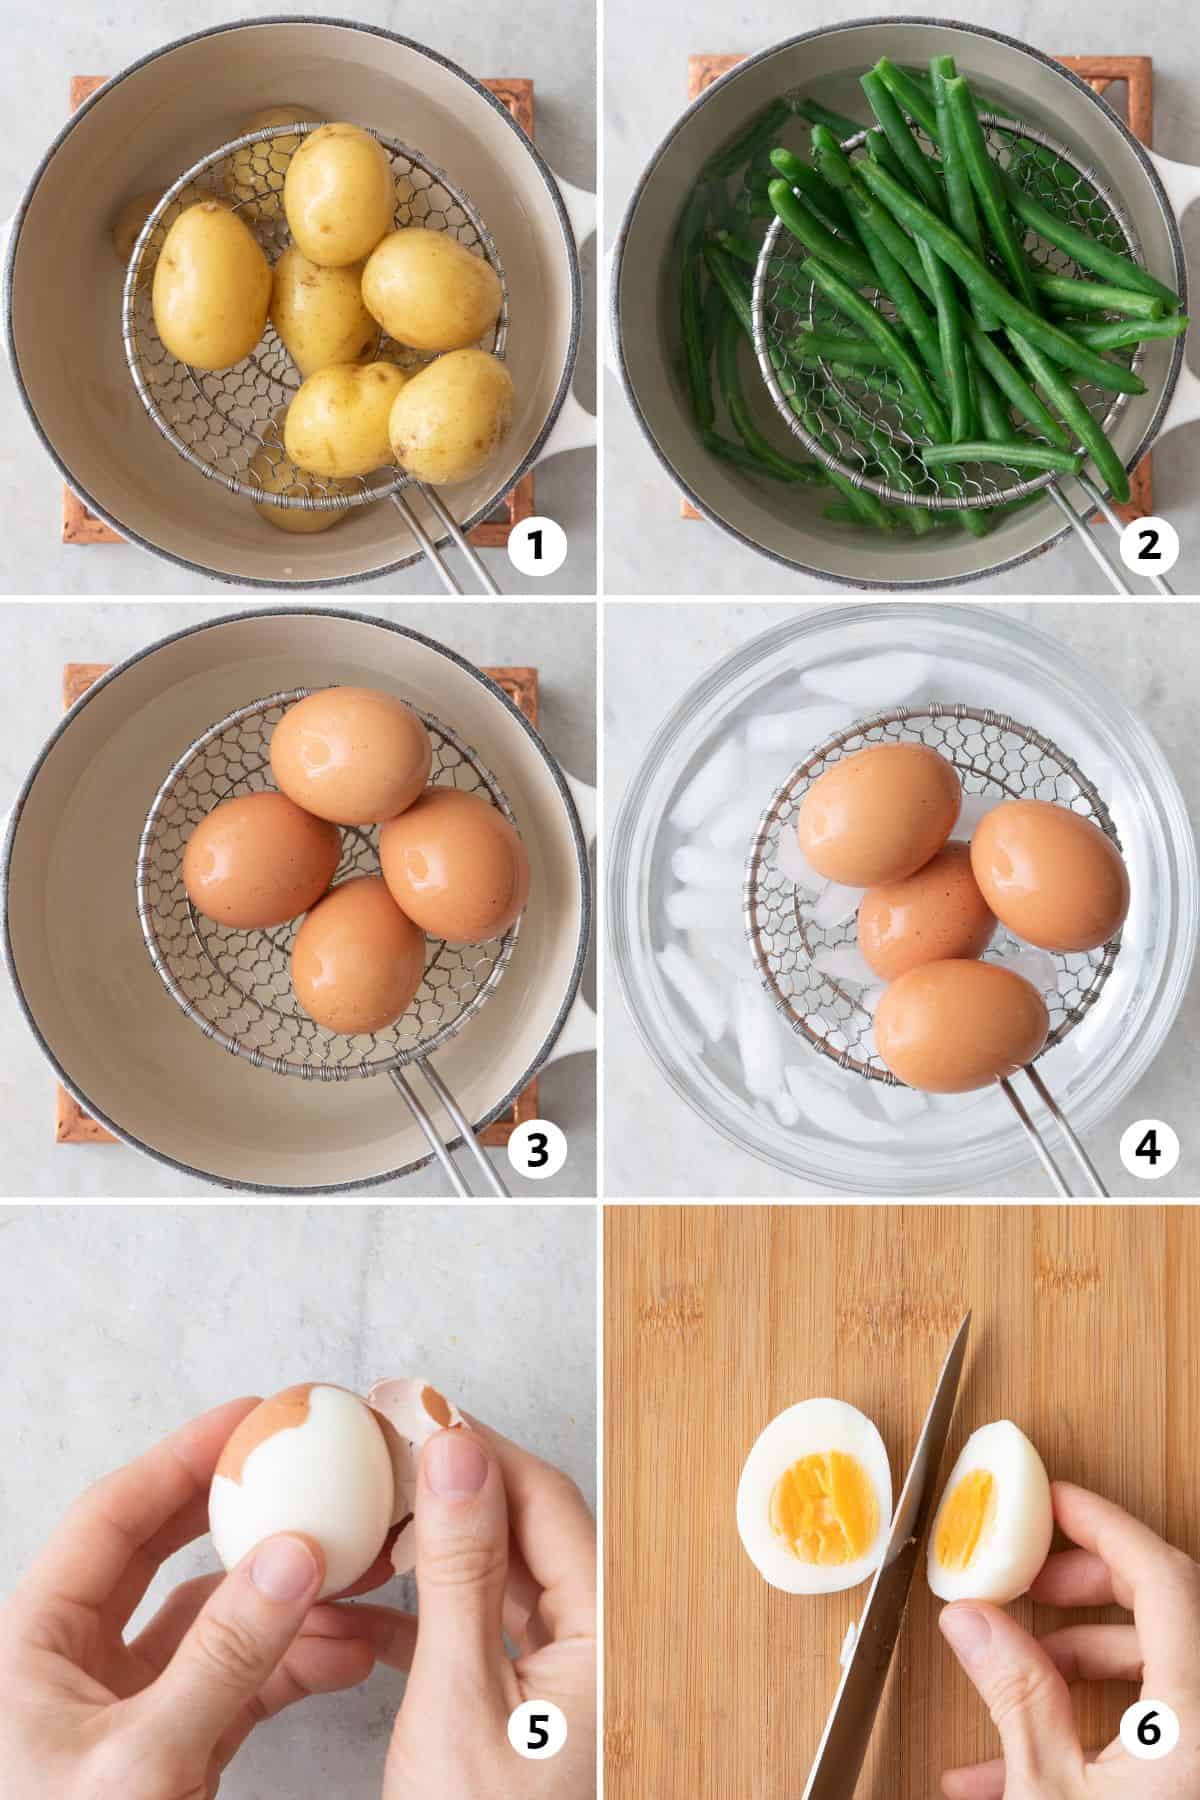 6 image collage making recipe: 1- removing potatoes from pot with spider too, 2- removing green beans, 3- removing eggs, -4 adding eggs to an ice bath, 5- peeling an egg, 6- cutting an egg in half.